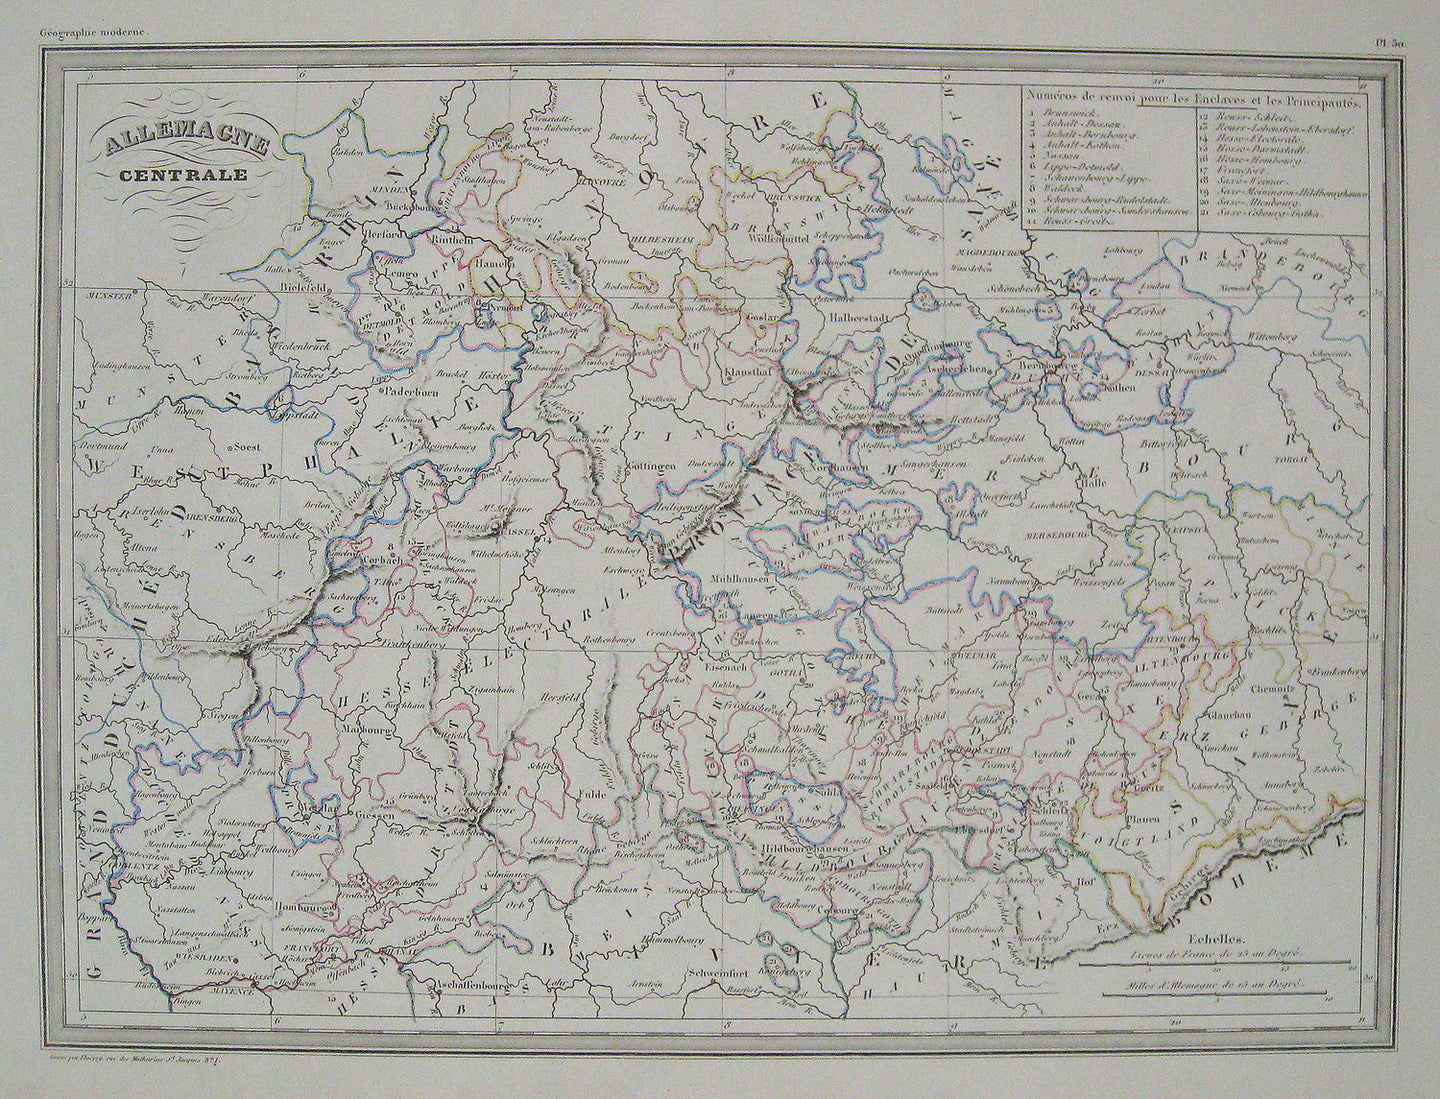 Antique-Hand-Colored-Map-Allemagne-centrale---Germany-Germany--1842-Malte-Brun-Maps-Of-Antiquity